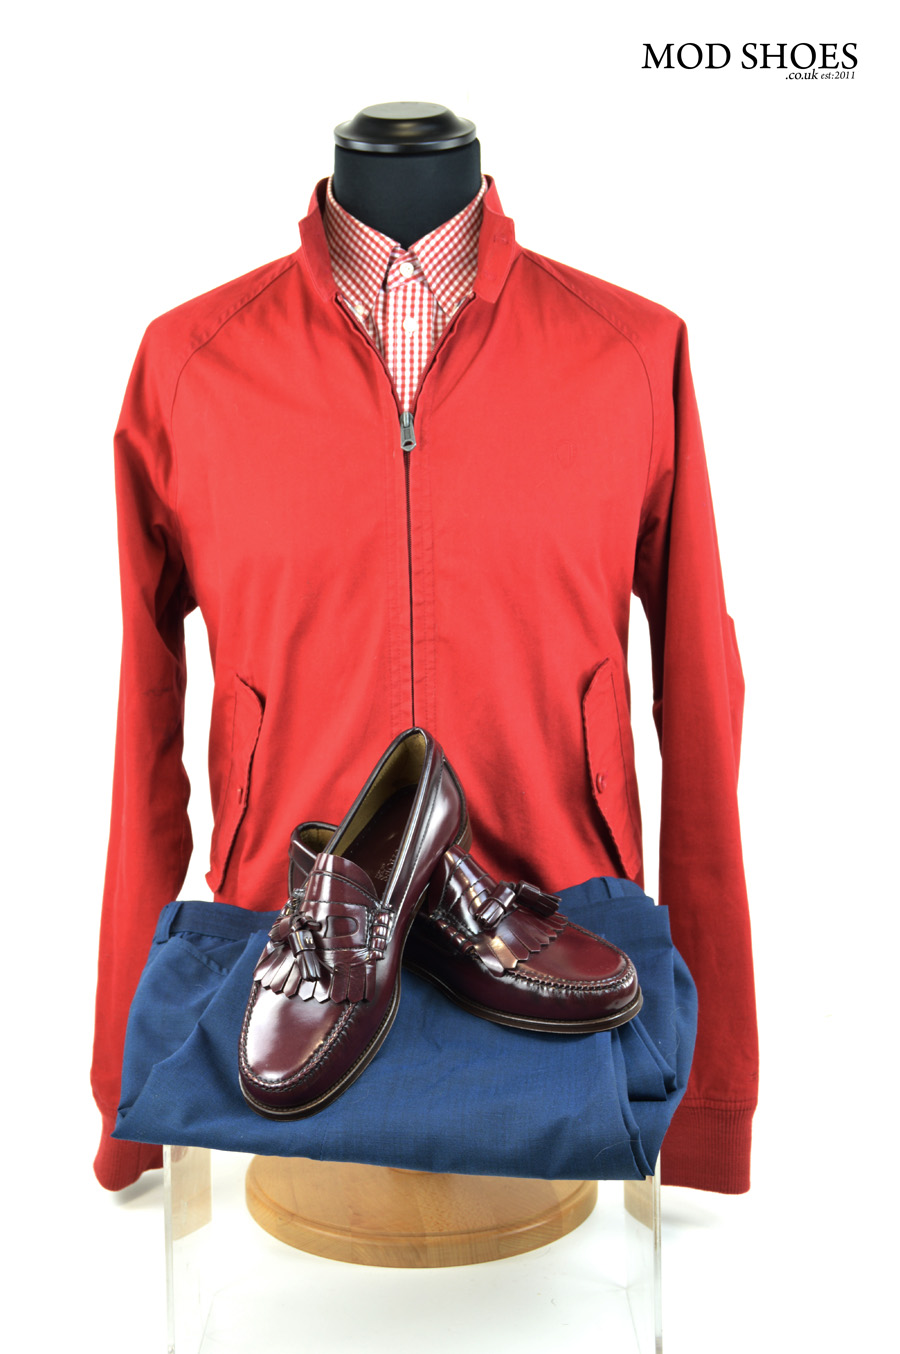 modshoes oxblood tassel loafers with red harrington